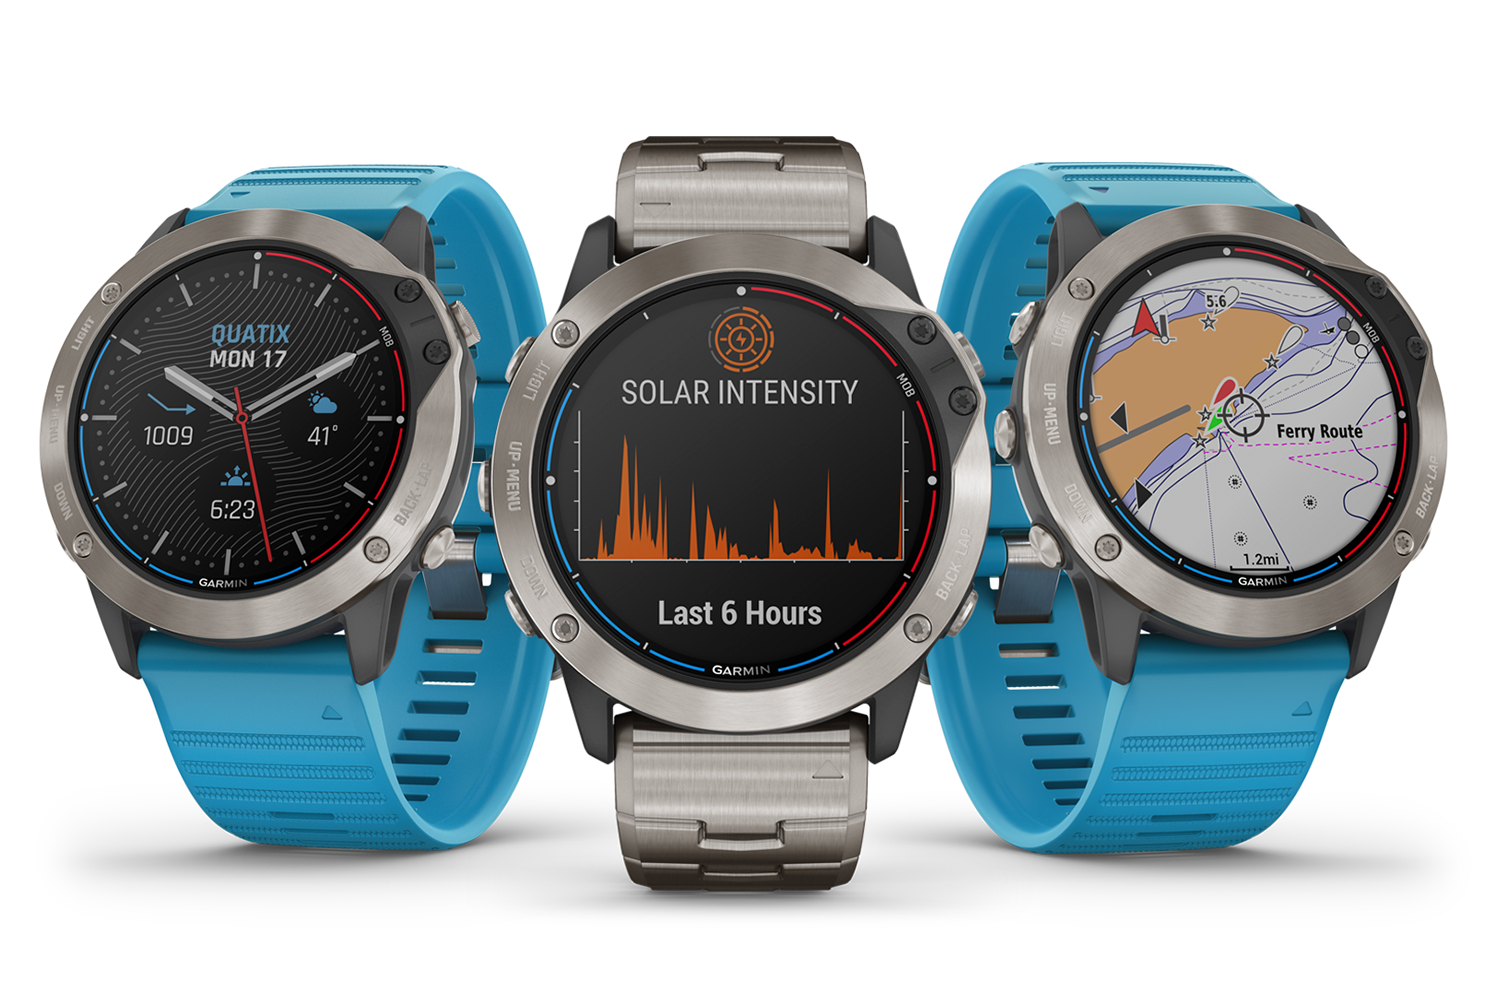 <p><b>Garmin Quatix 6X Solar</b></p>
<p>Enjoy more time on the water with Quatix 6X Solar marine GPS smartwatch with solar charging. Its unique power-replenishing feature extends battery life on its big 1.4-inch display, so youâll have more time to take advantage of its comprehensive connectivity. The device is compatible with Garmin chartplotters and other devices1 to offer autopilot control, data streaming, sail racing assistance, Fusion-Link entertainment control and much more. It supports optional BlueChart g3 coastal charts and LakeVÃ¼ g3 inland maps with improved chart presentation. It provides advanced fitness features and wrist-based heart rate monitoring. It also includes built-in activity profiles for paddle sports, land sports, performance metrics plus smart notifications, and access to Garmin Connect and music storage. </p>
<p><a href=